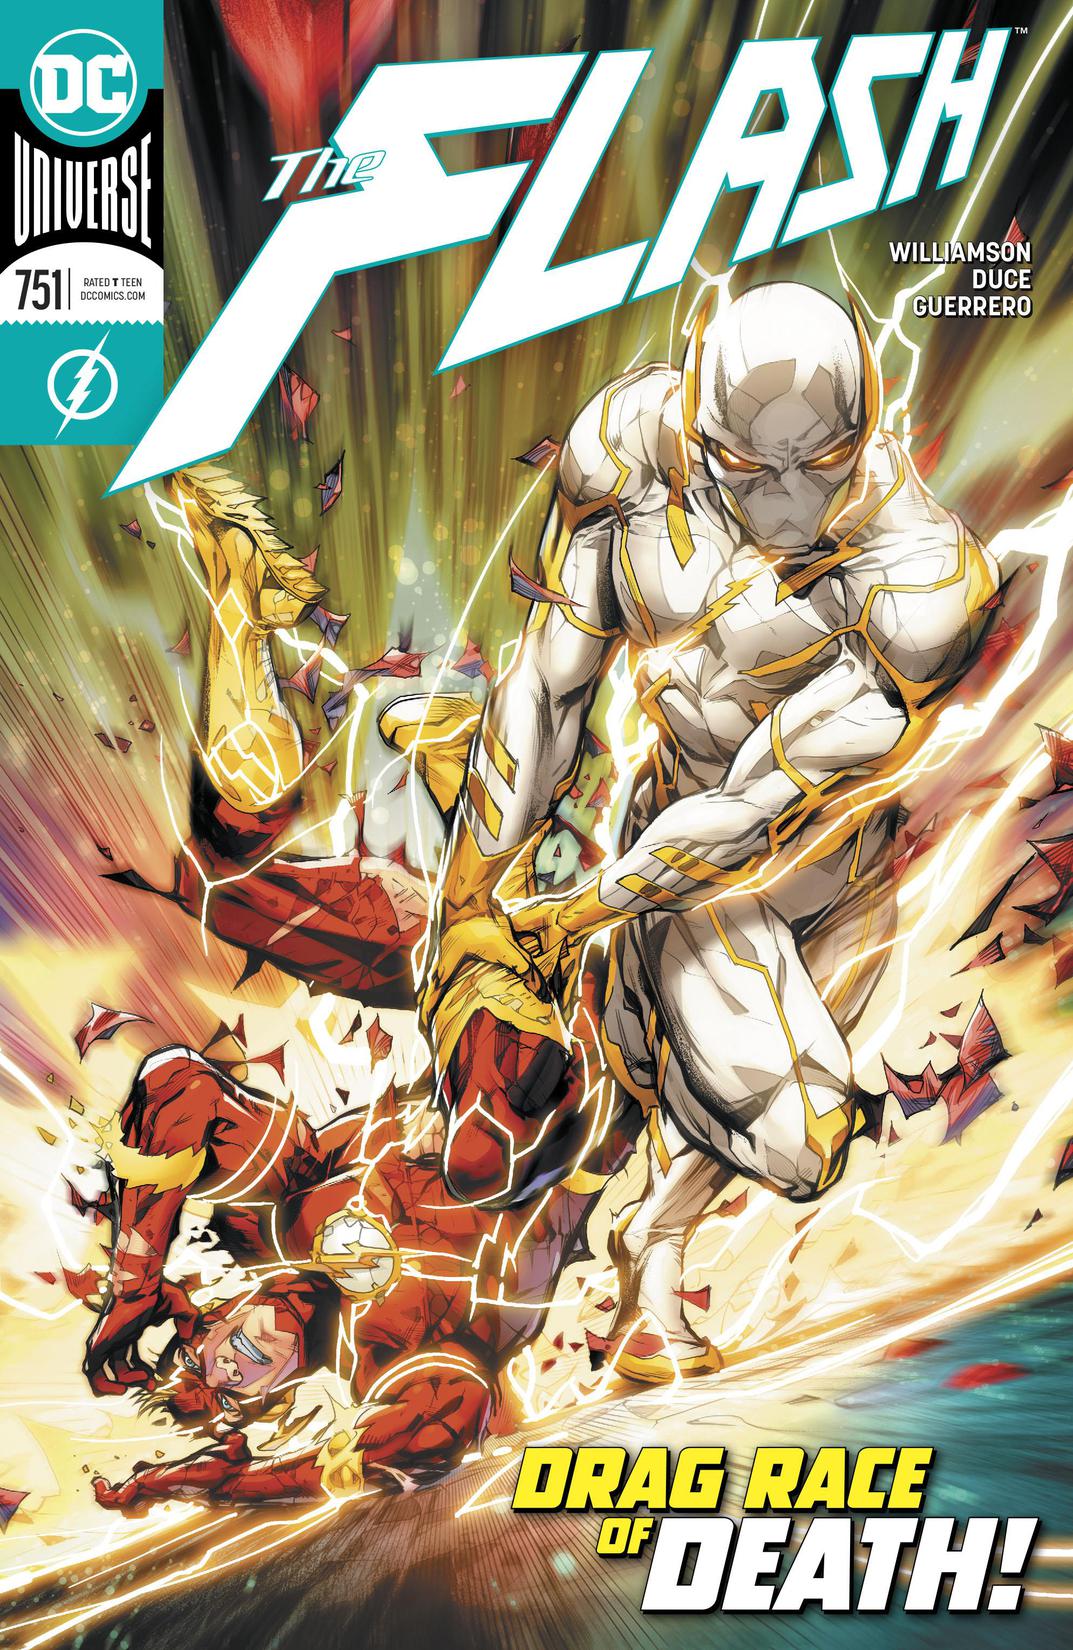 The Flash (2016-) #751 preview images